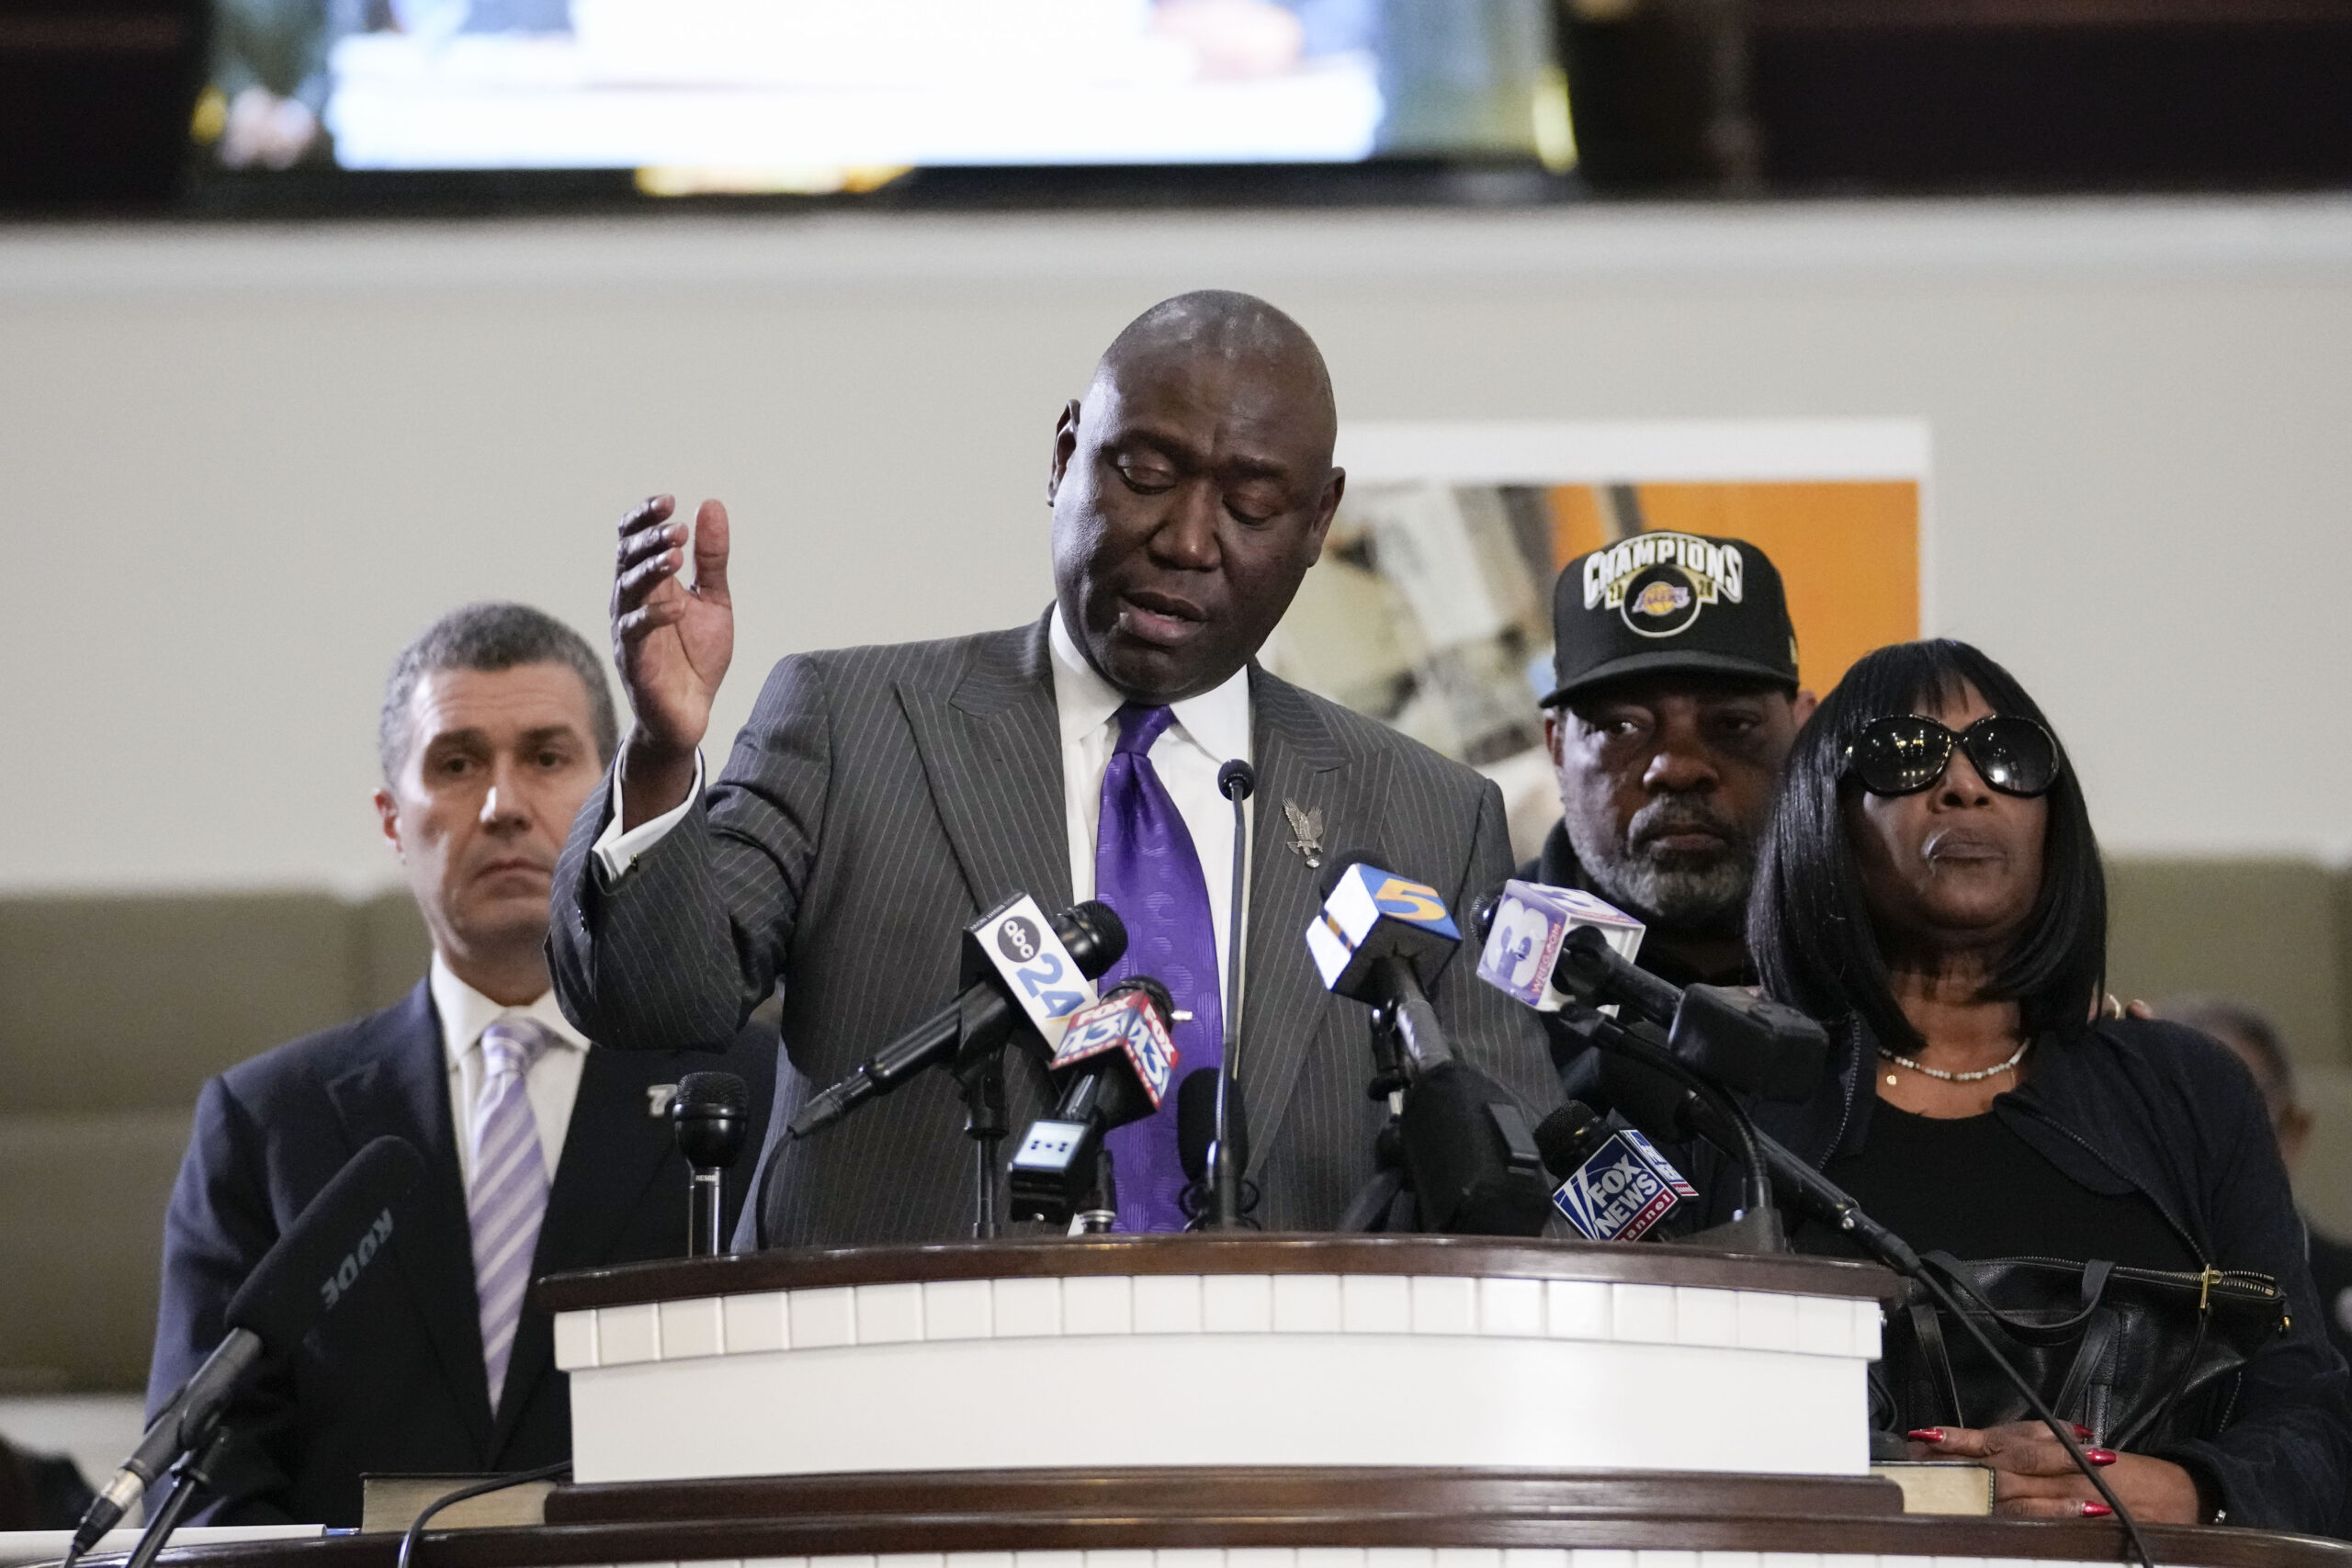 Civil rights attorney Ben Crump speaks at a news conference with the family of Tyre Nichols, who died after being beaten by Memphis police officers, with RowVaughn Wells, mother of Tyre, right, and Tyre's stepfather Rodney Wells, along with attorney Tony Romanucci, left, in Memphis, Tennessee on Monday, Jan. 23, 2023. Photo credit: Gerald Herbert, The Associated Press